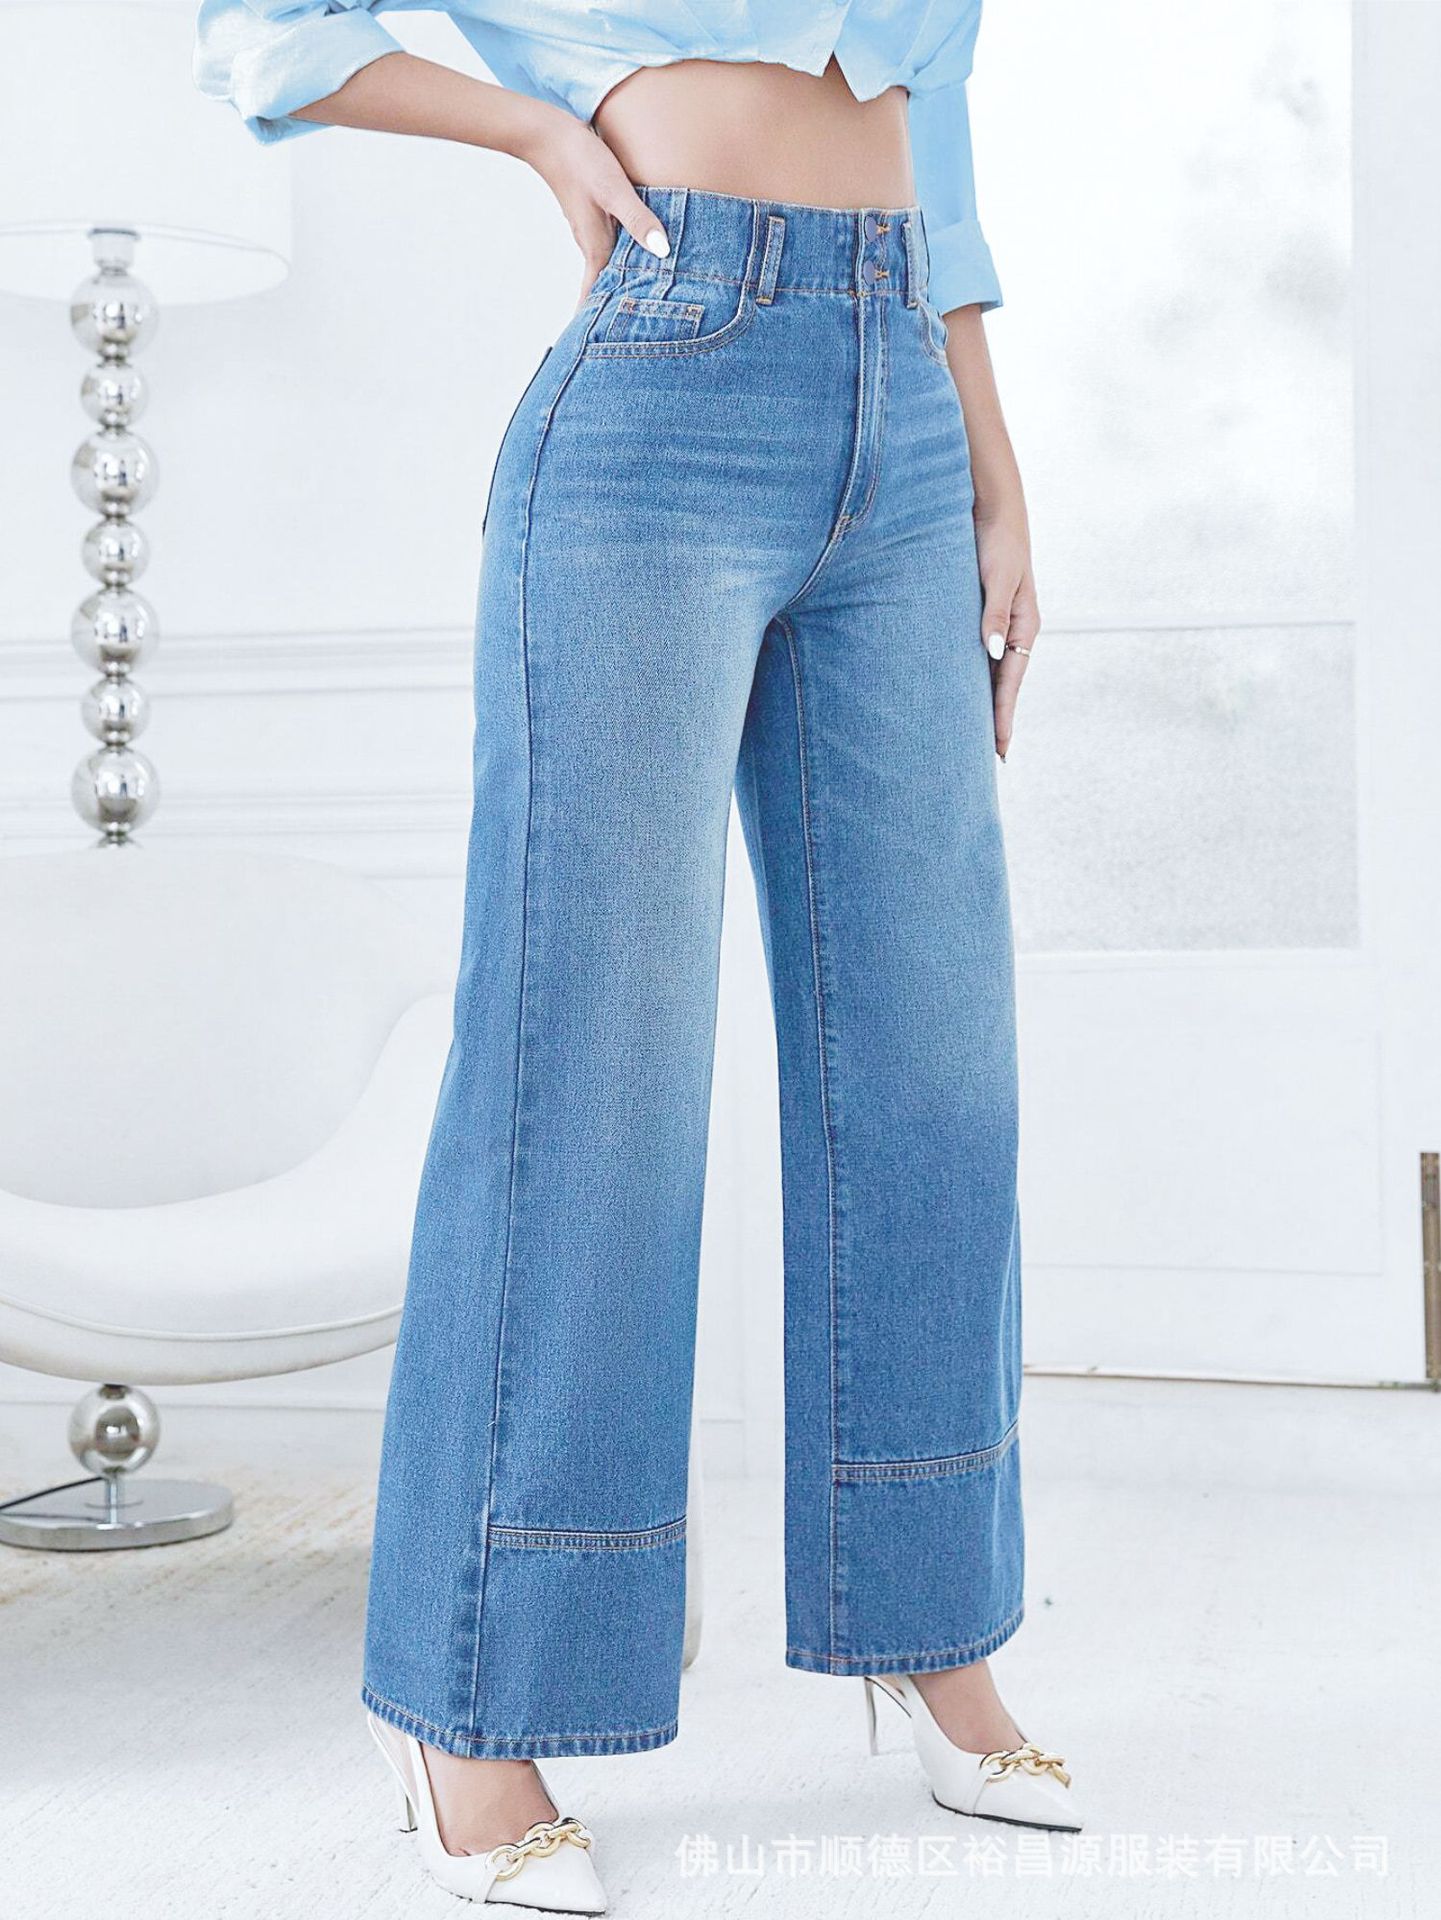 Cross-Border New Amazon EBay Wide-Leg Jeans Women's European and American Style Jeans Fashion Sexy High Waist Double Buttons